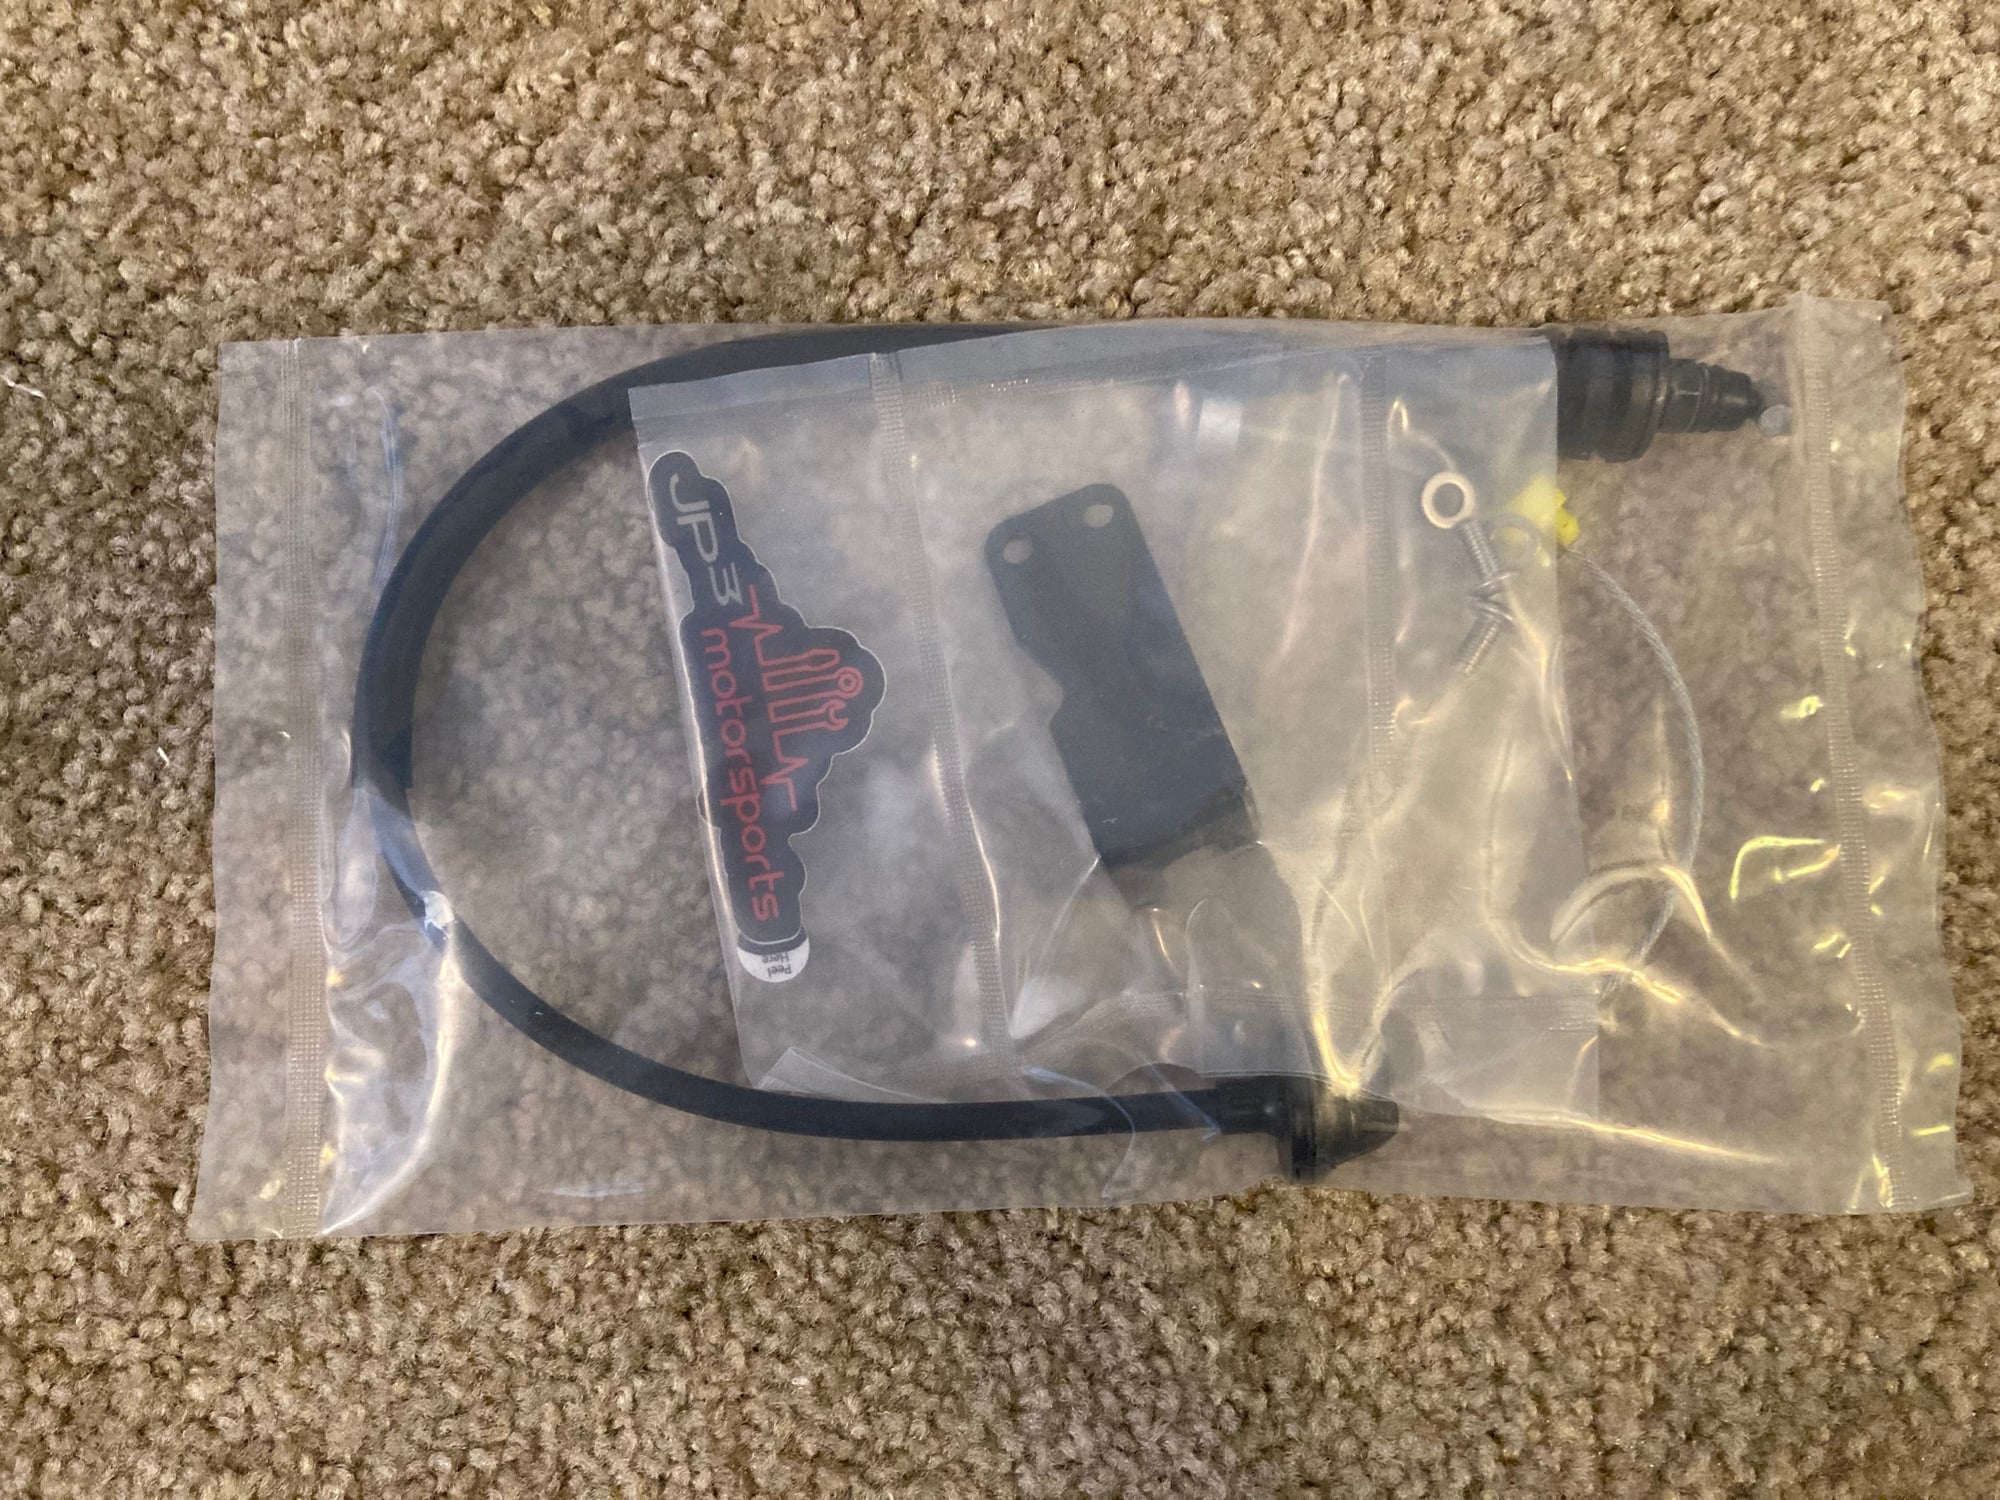 Miscellaneous - BNIB JP3 FD RX-7 Shorty Throttle Cable Kit - New - 1993 to 1995 Mazda RX-7 - Indianapolis, IN 46278, United States